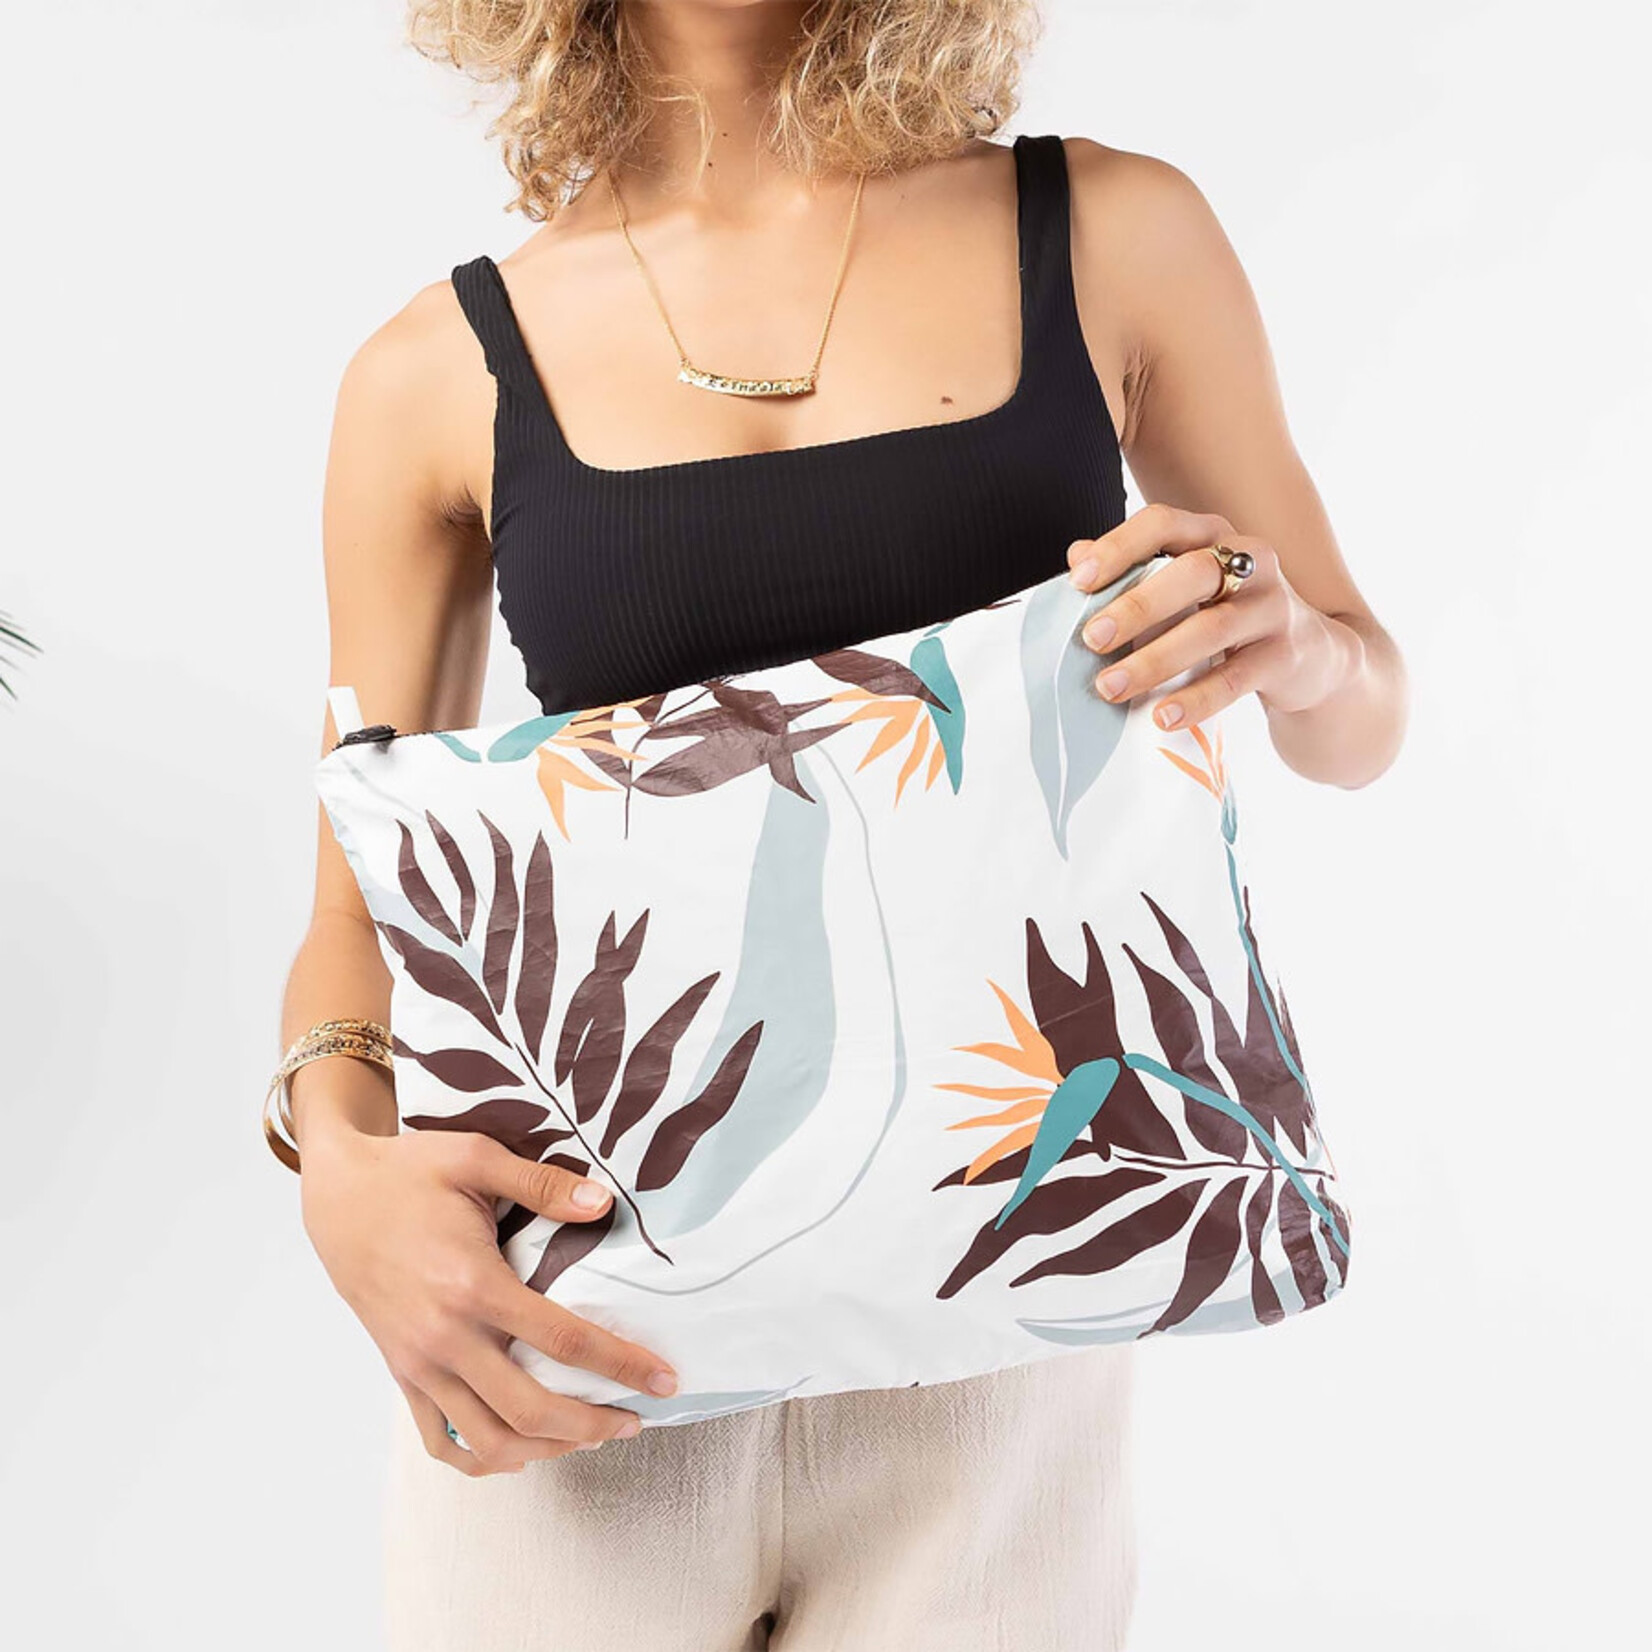 ALOHA Collection Max Pouch - Painted Birds